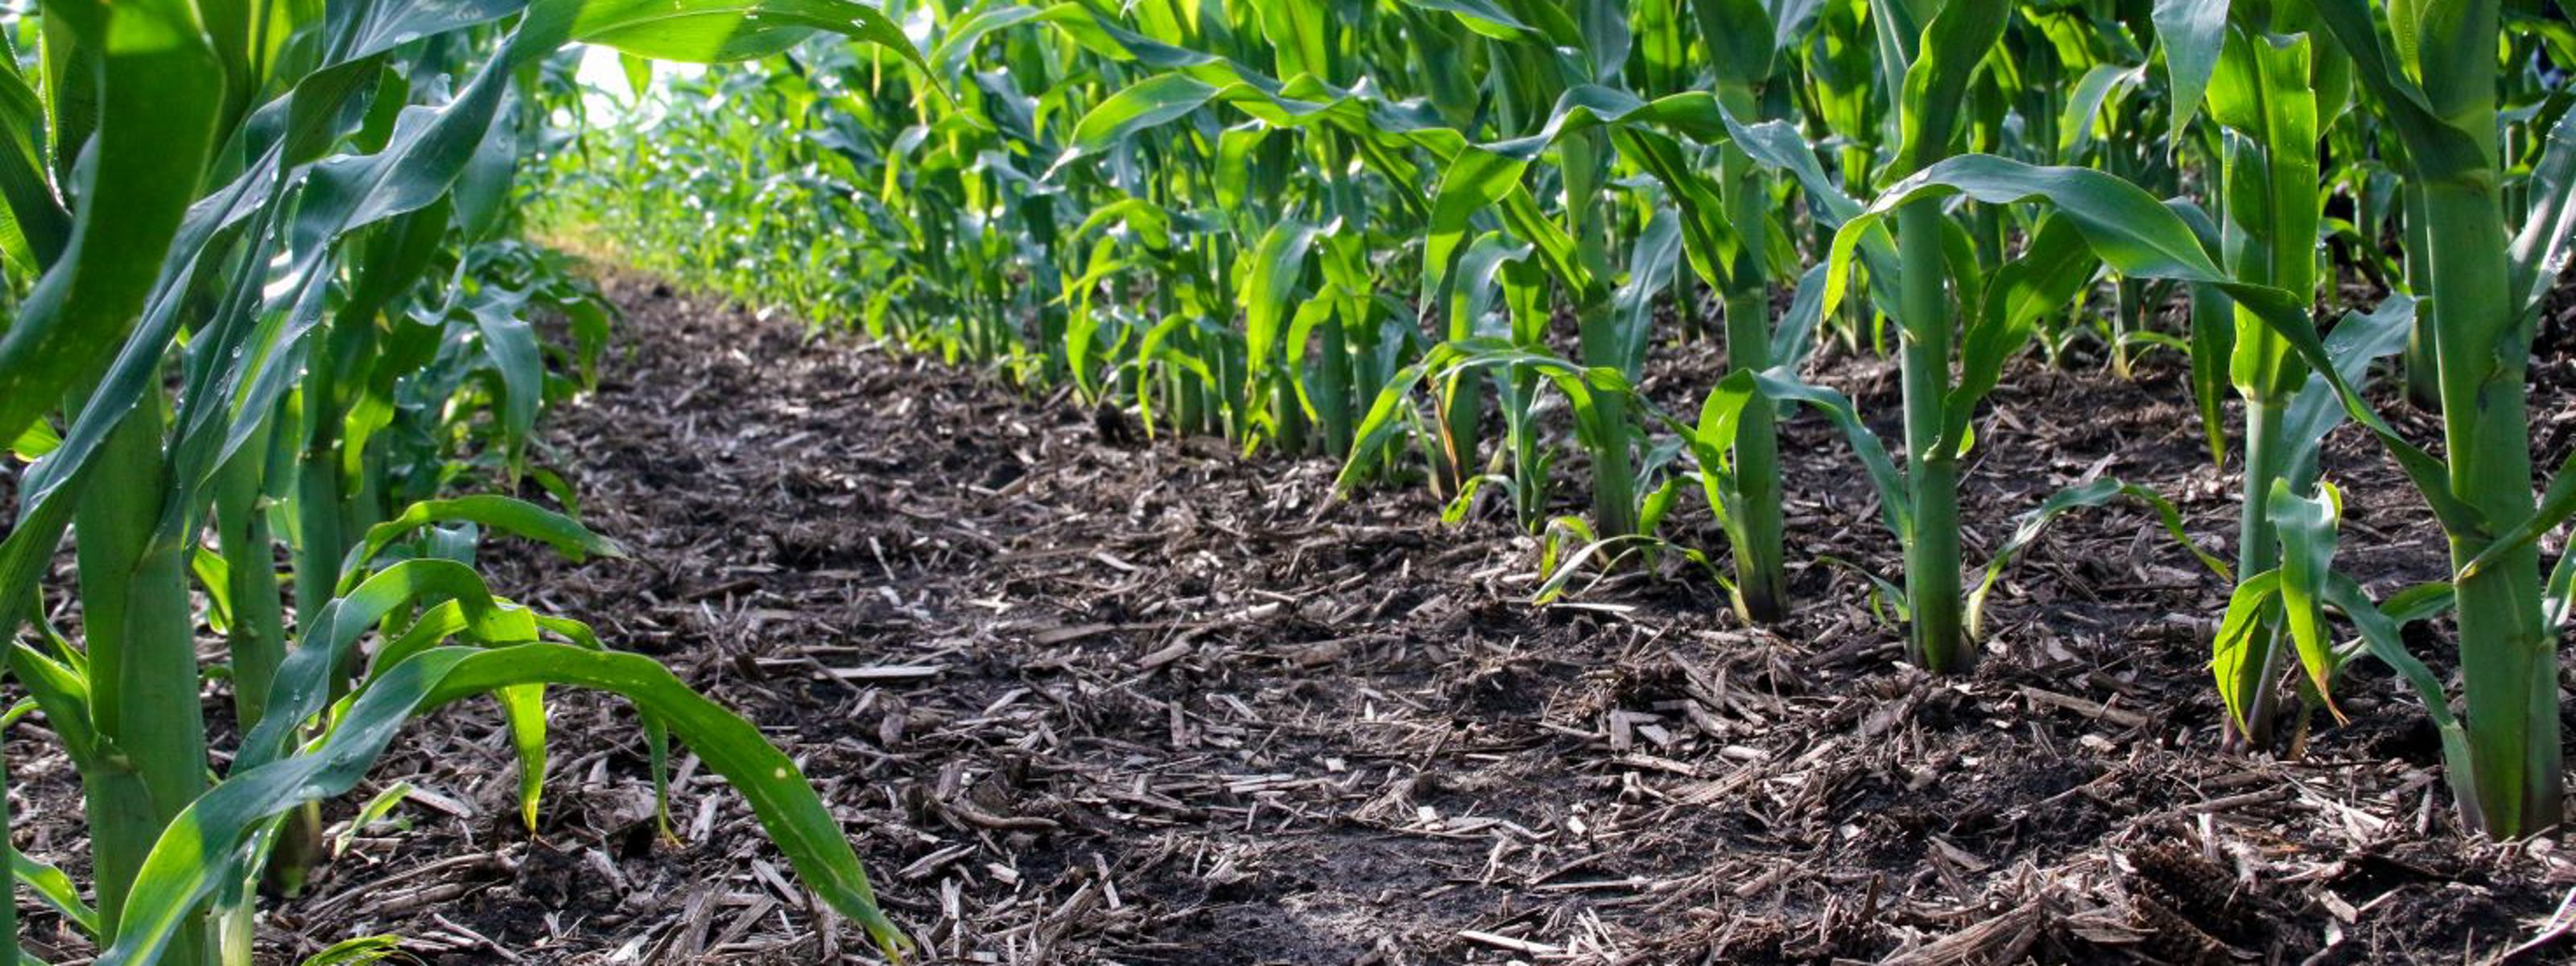 Ground-level view of soil and the bottoms of corn stalks in a cornfield.